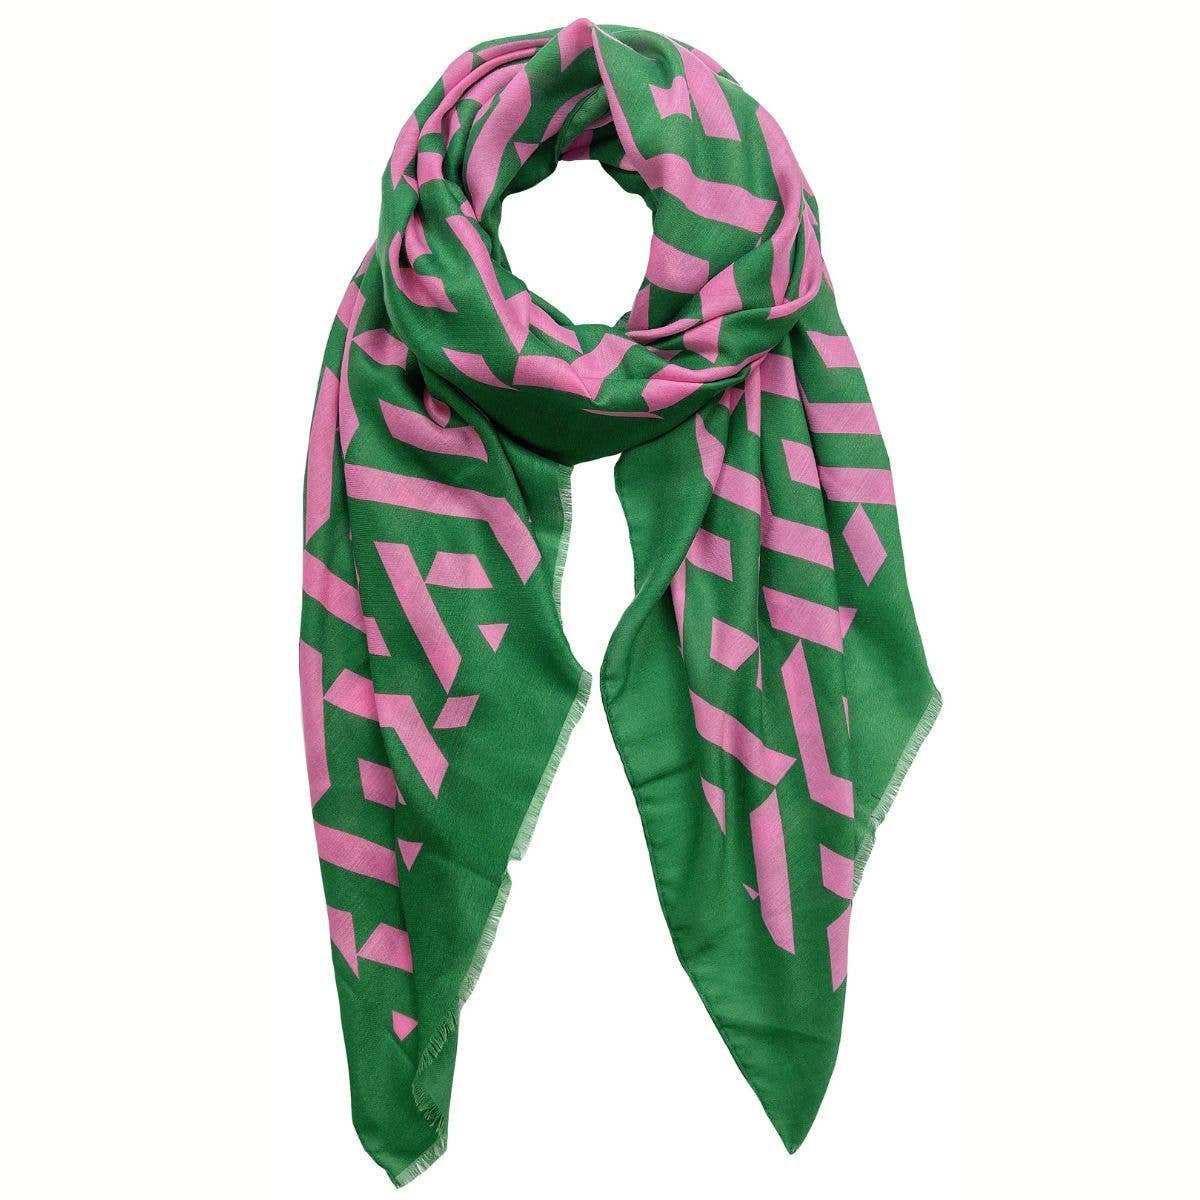 Scarf Wrap Geo Print Pink Green for Women